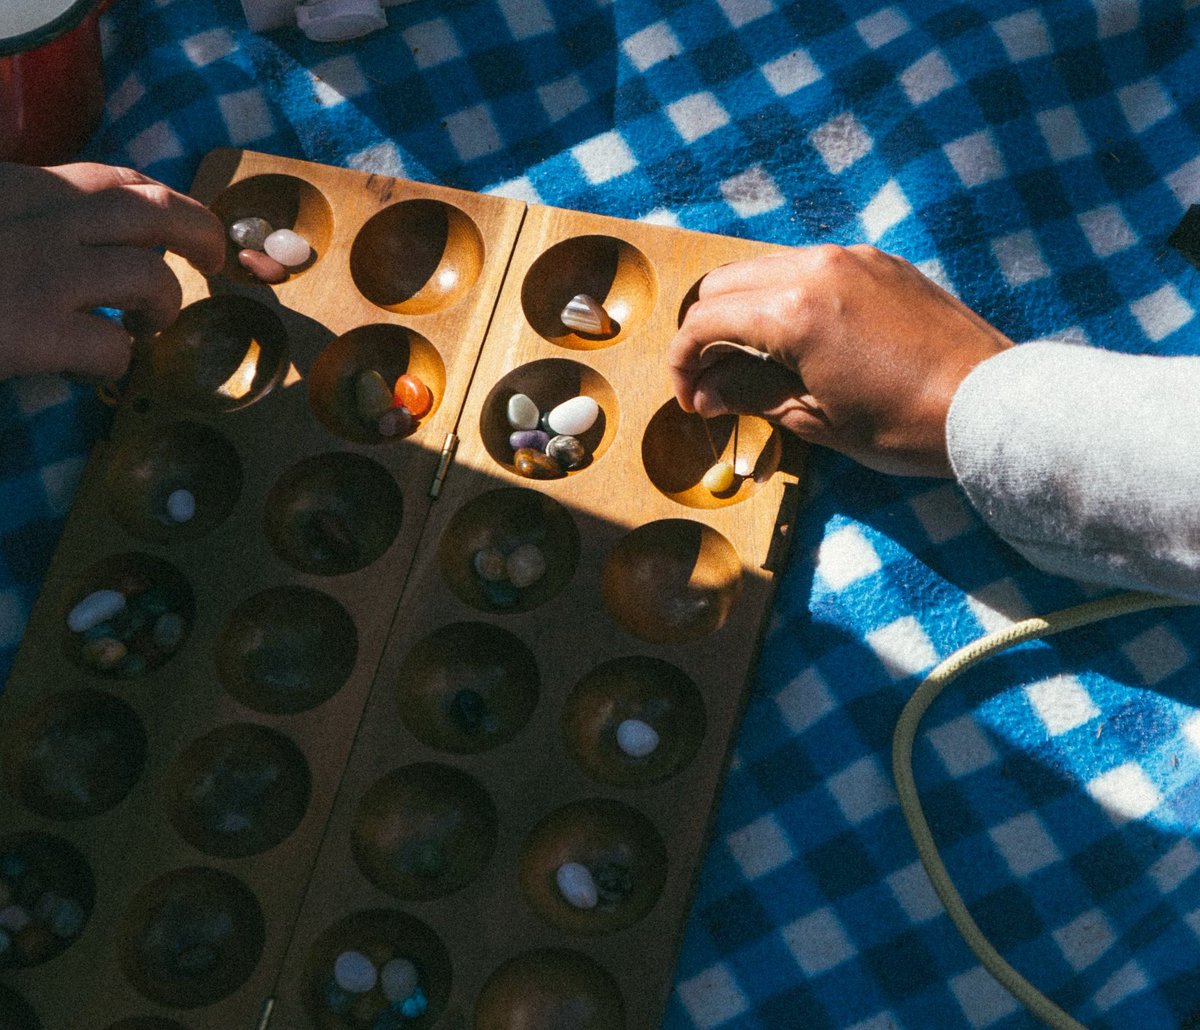 Did you know? Mancala is a game played throughout the African continent.

Celebrate #BlackHistoryMonth by playing this fun game with seniors and children alike.

#caregiving #agingcare #seniors #play #games #history #activities #childcare #playideas #mancala #africa #nursinglife